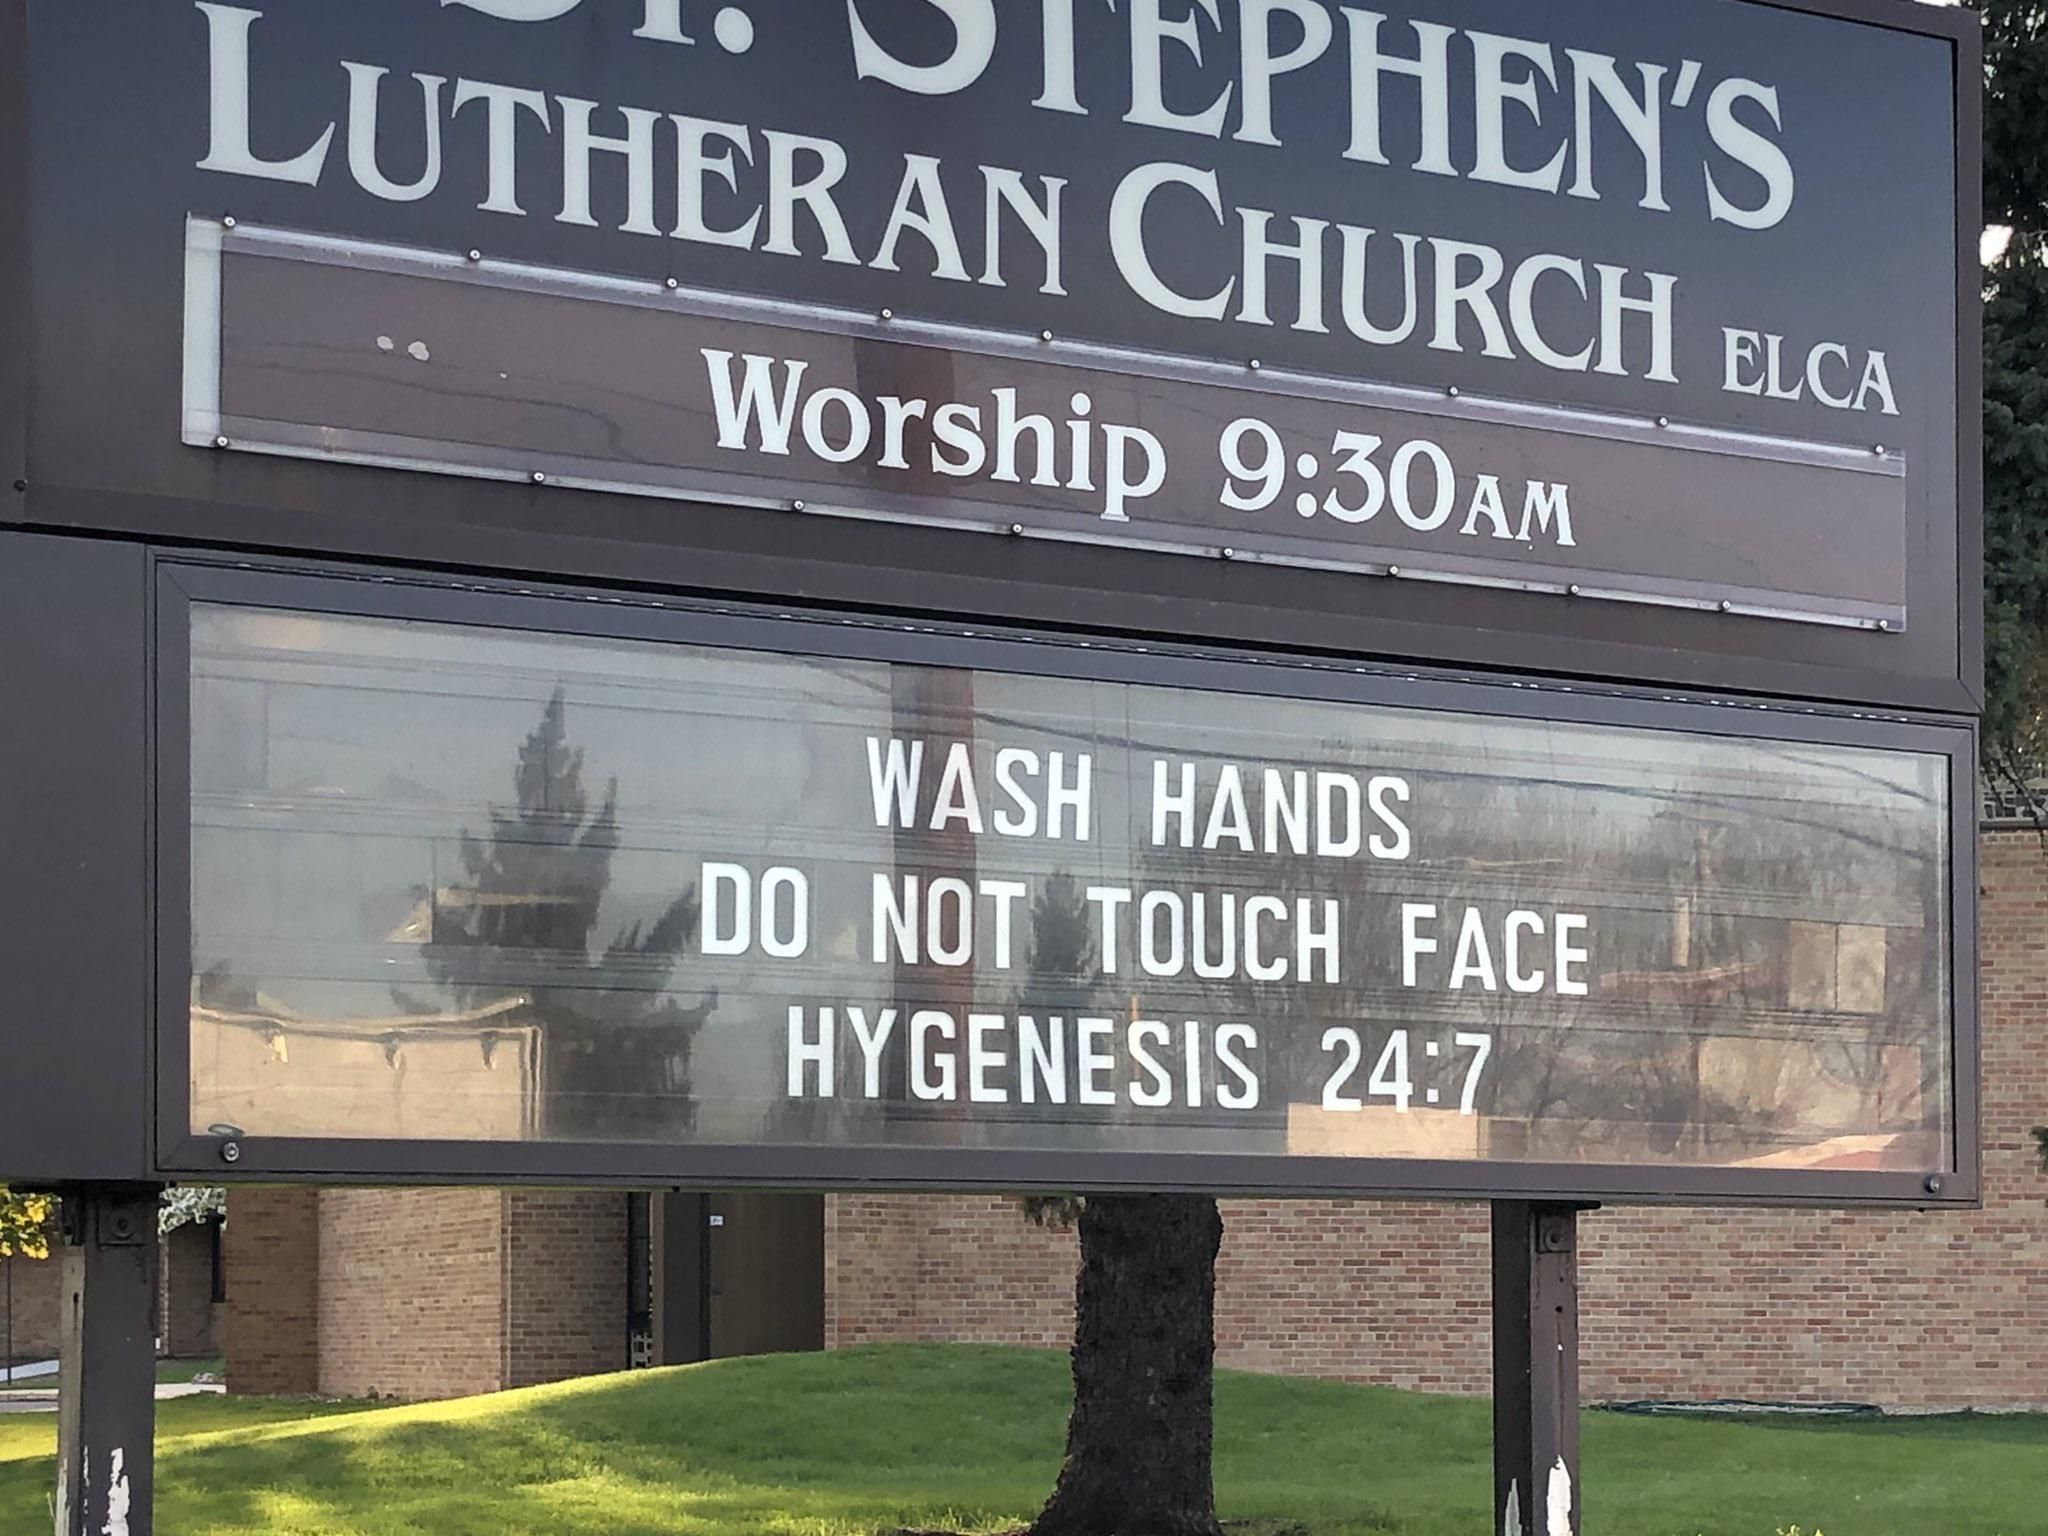 This church gets it